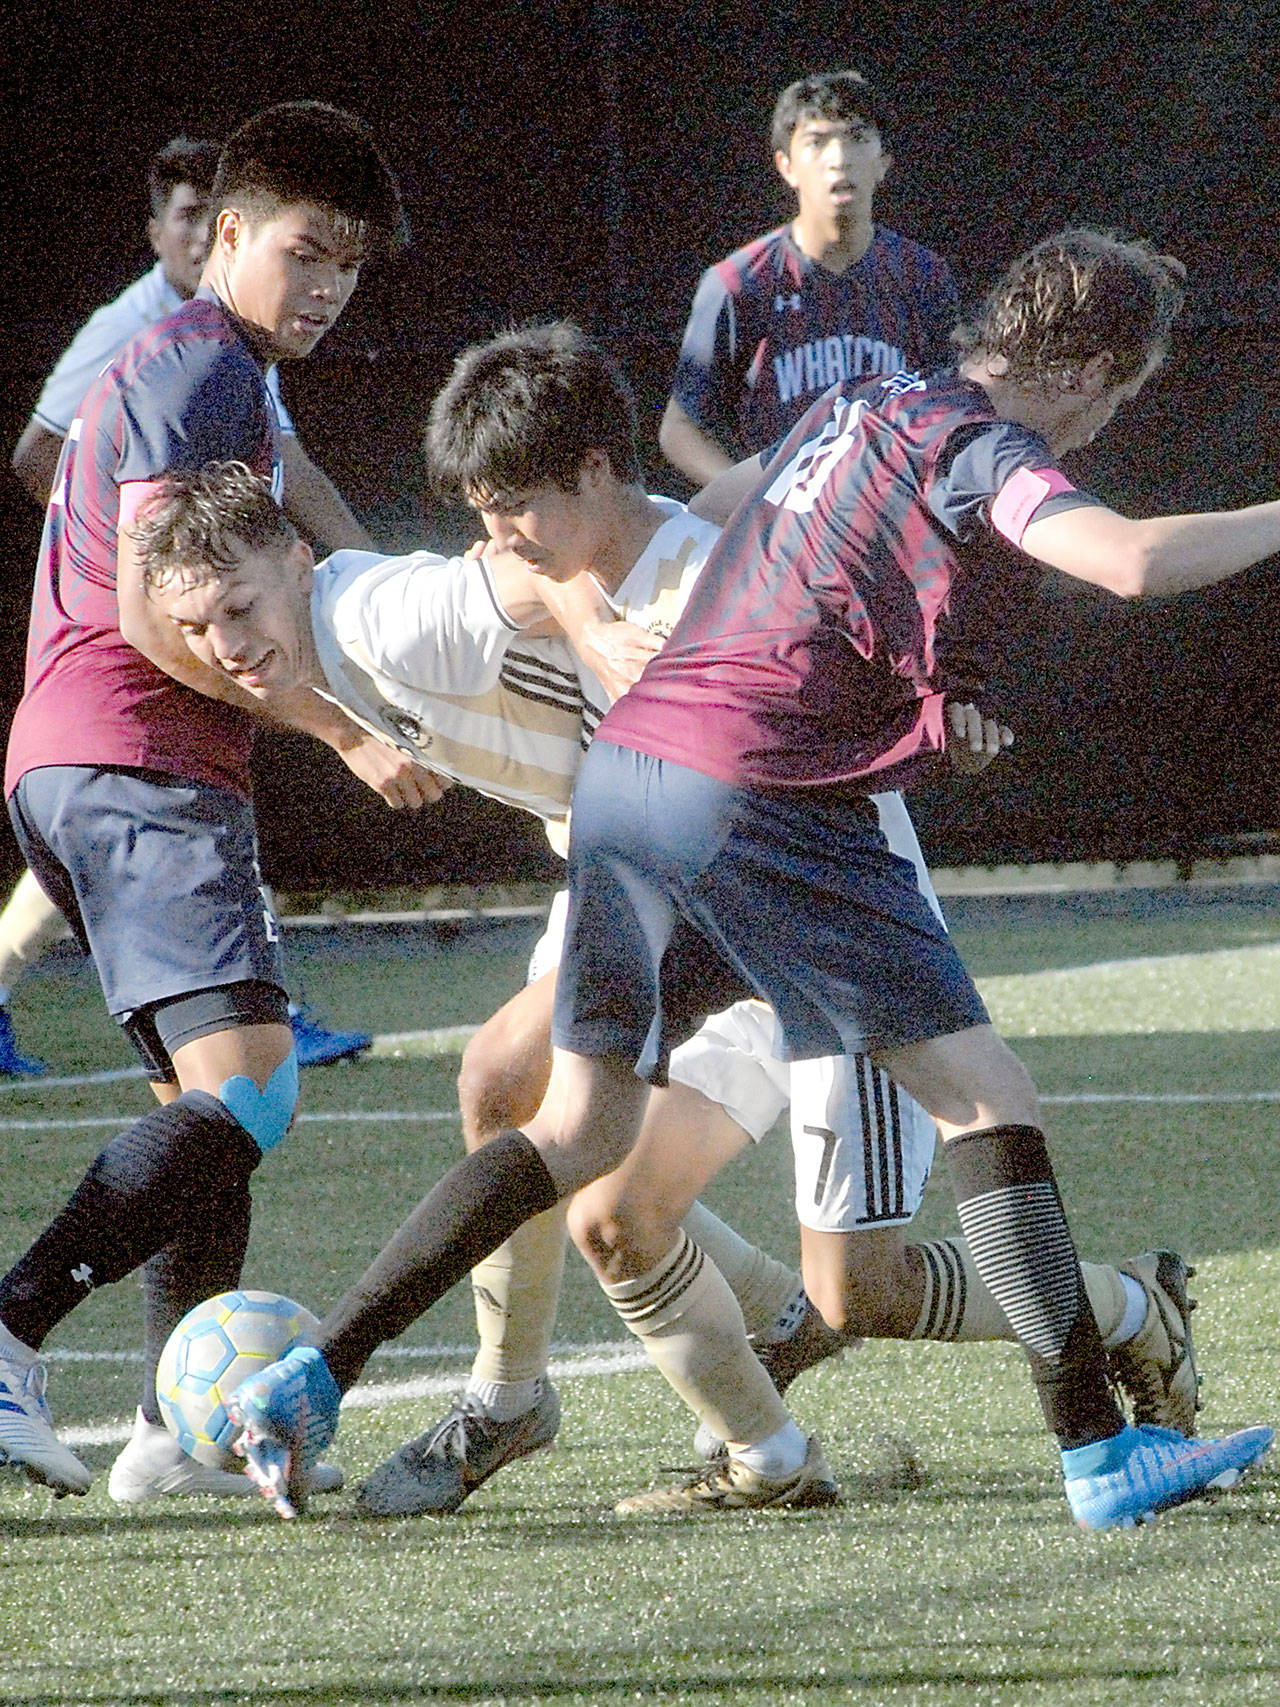 Keith Thorpe/Peninsula Daily News Peninsula’s Mason Haubrich, center left and Hide Inoue, center right, try to burst through the defense of Whatcom’s Pono Halemano, left and Clover Martin during Wednesday’s match at Wally Sigmar Field in Port Angeles.